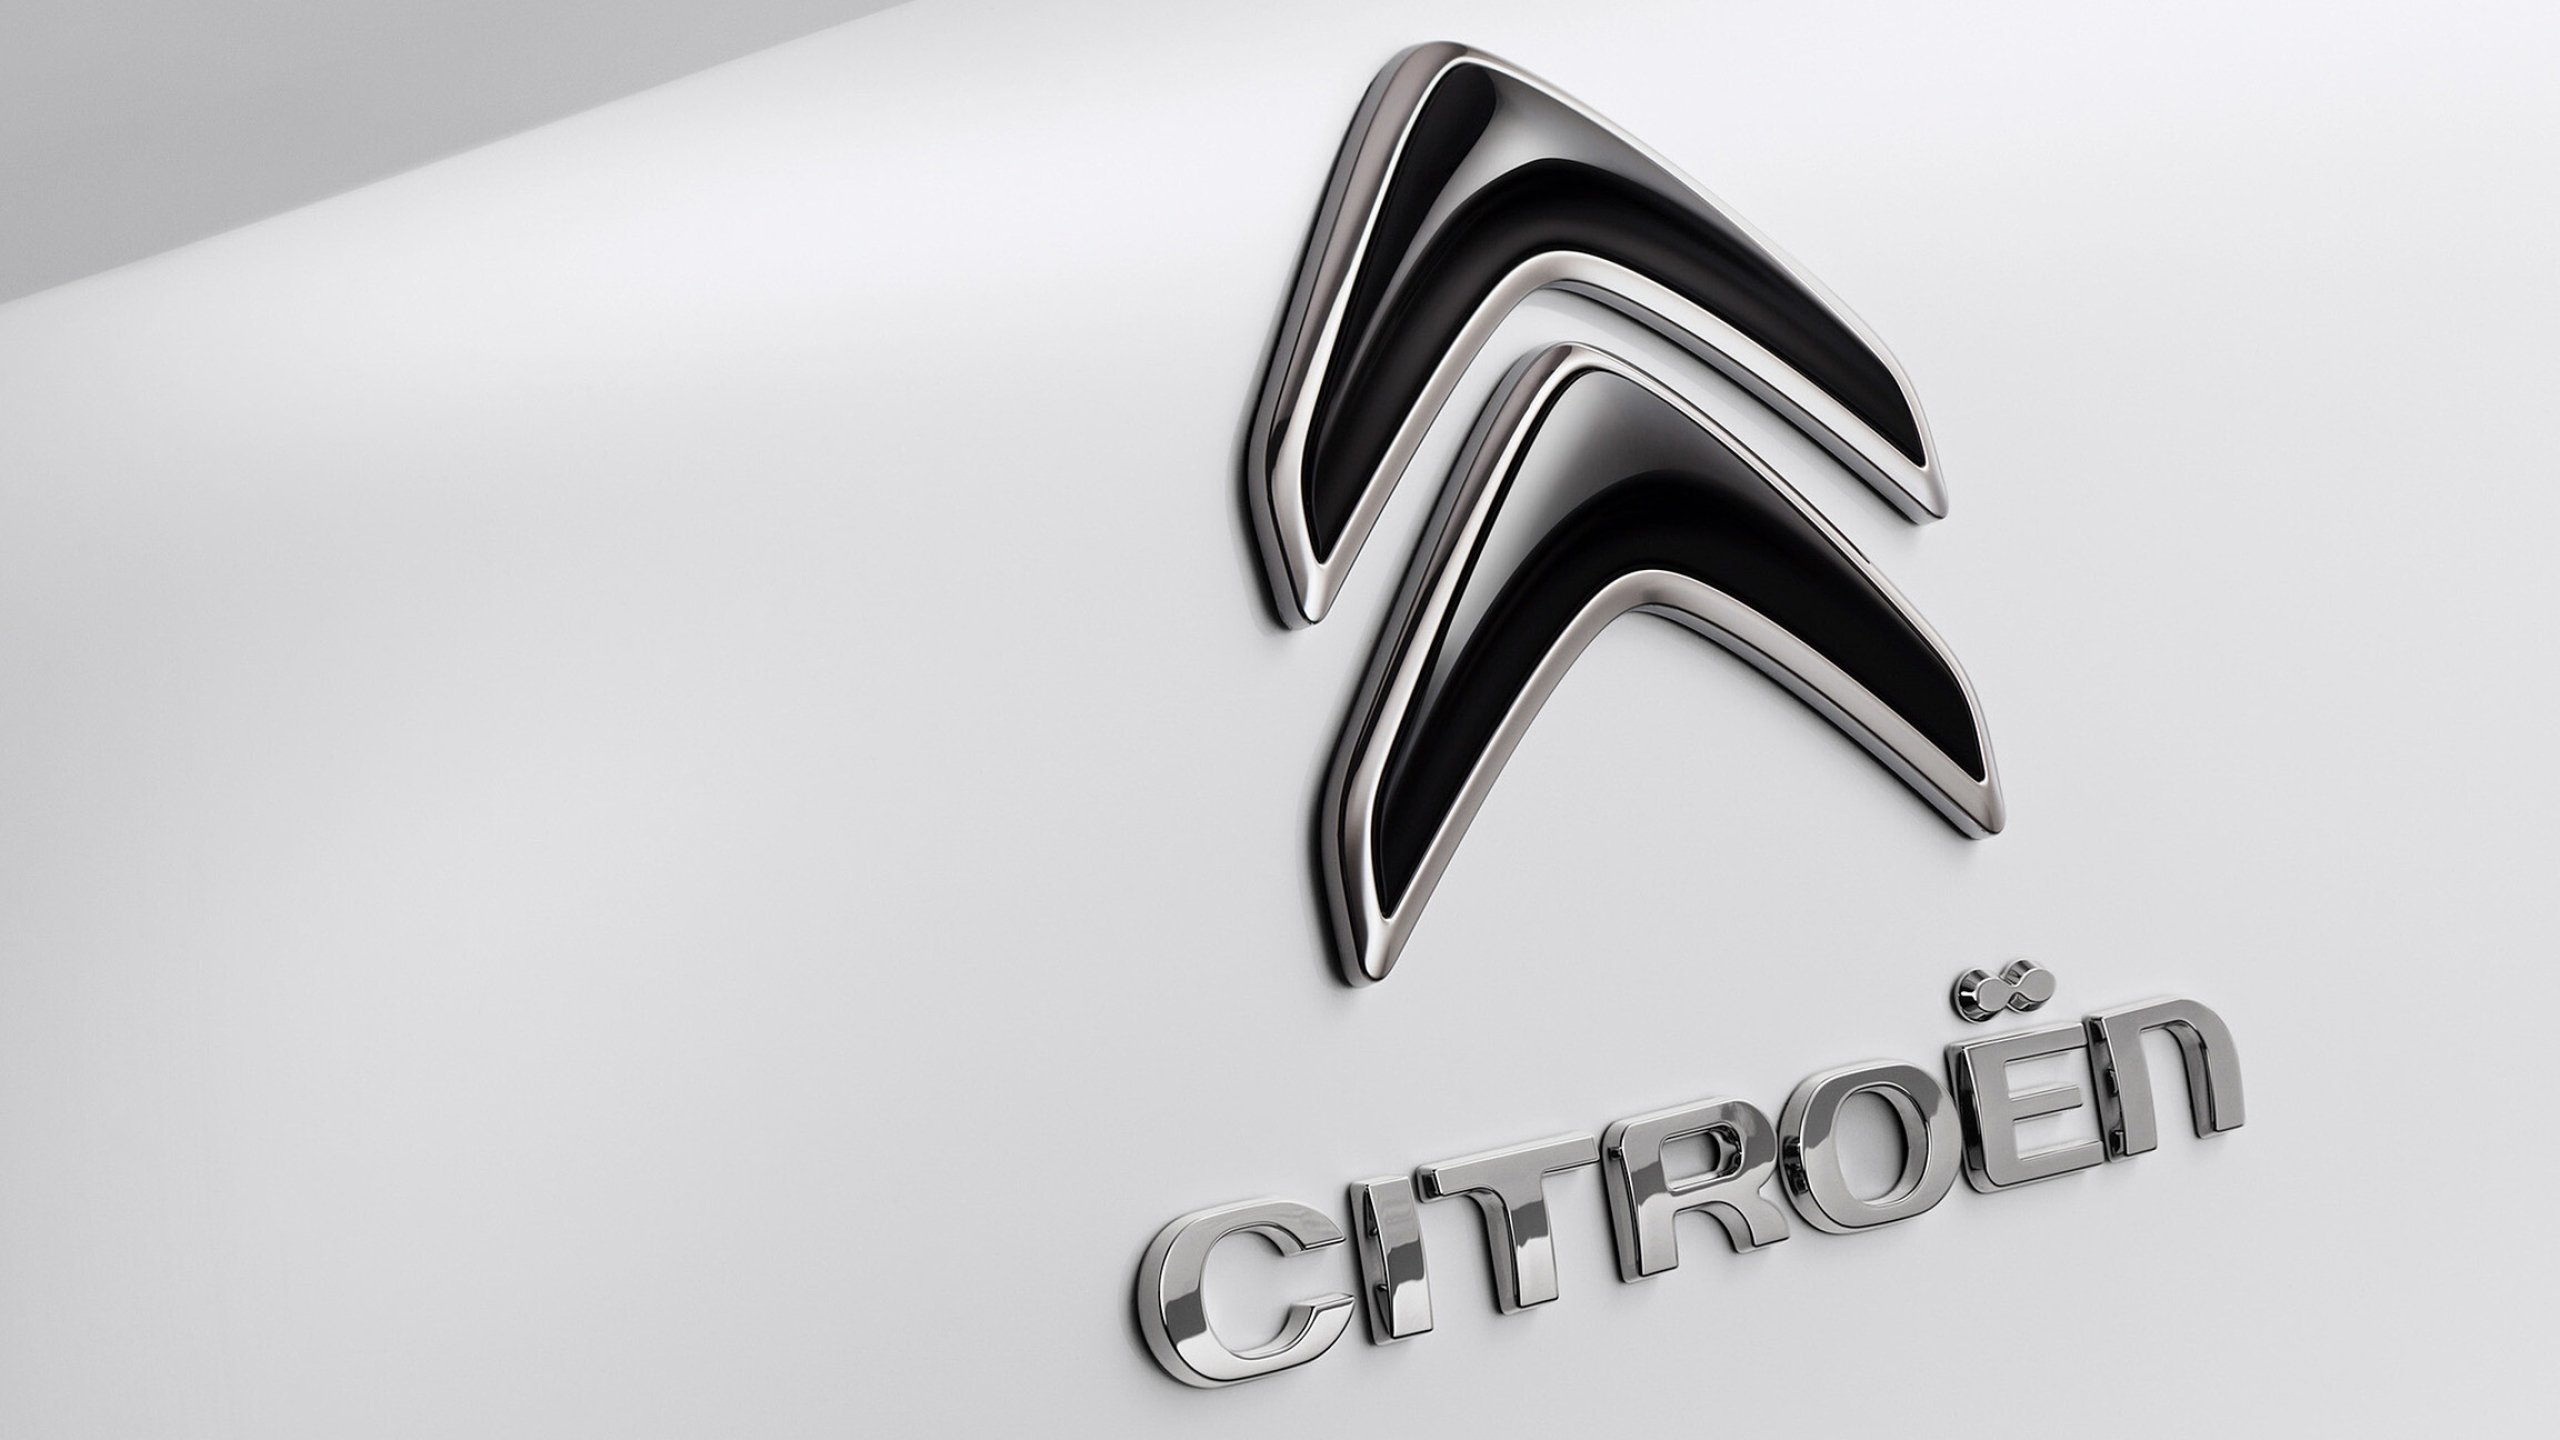 Citroen: Produced the world's first hydropneumatic self-levelling suspension system in 1954. 2560x1440 HD Background.